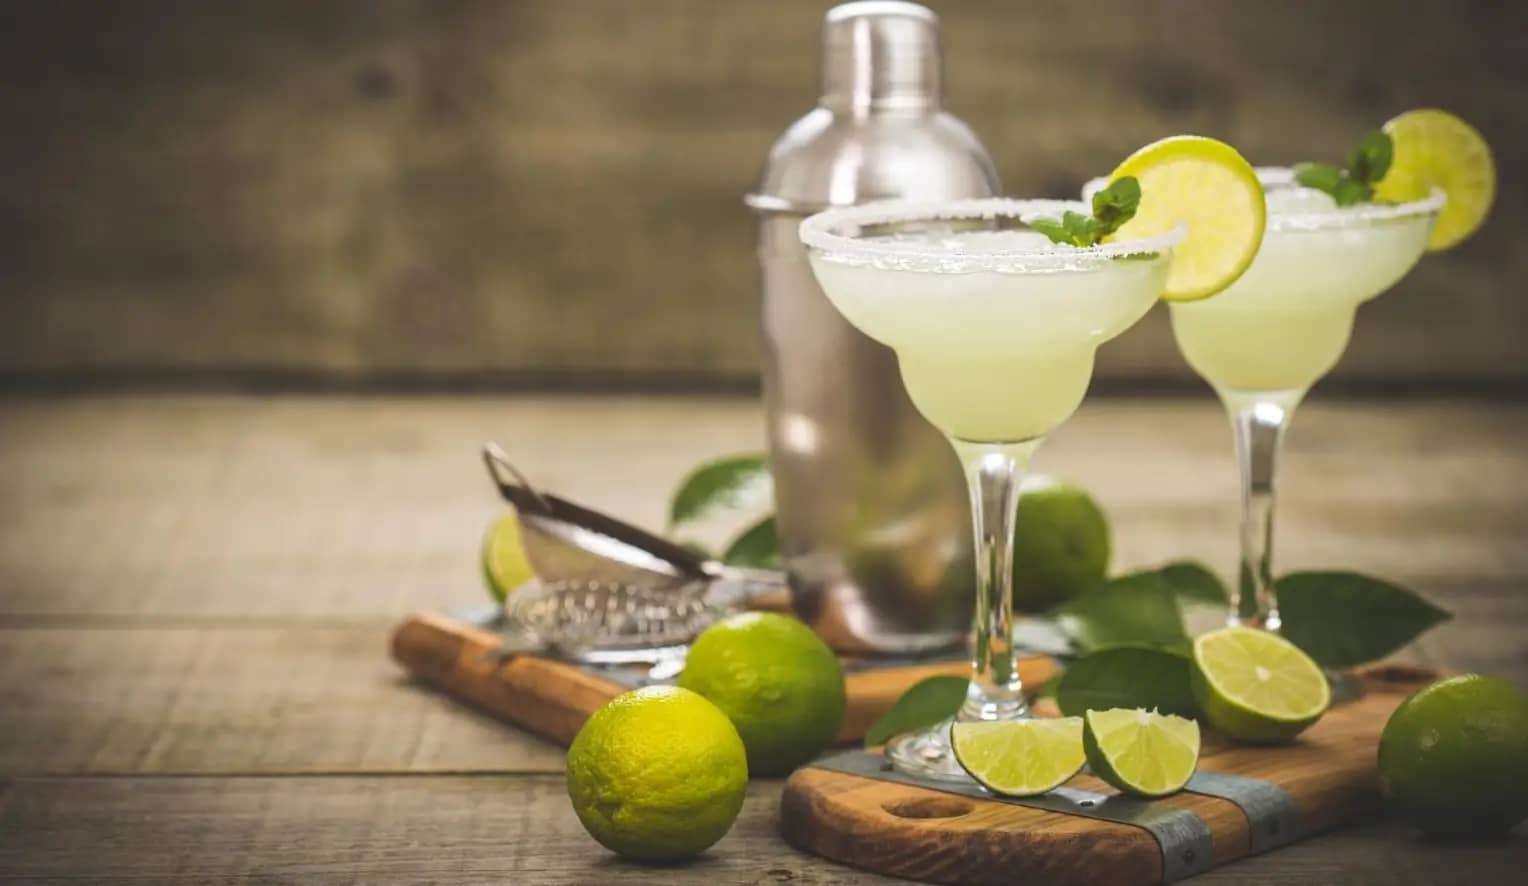 Raise Your Glass Celebrate National Margarita Day with 5 Unique Recipes